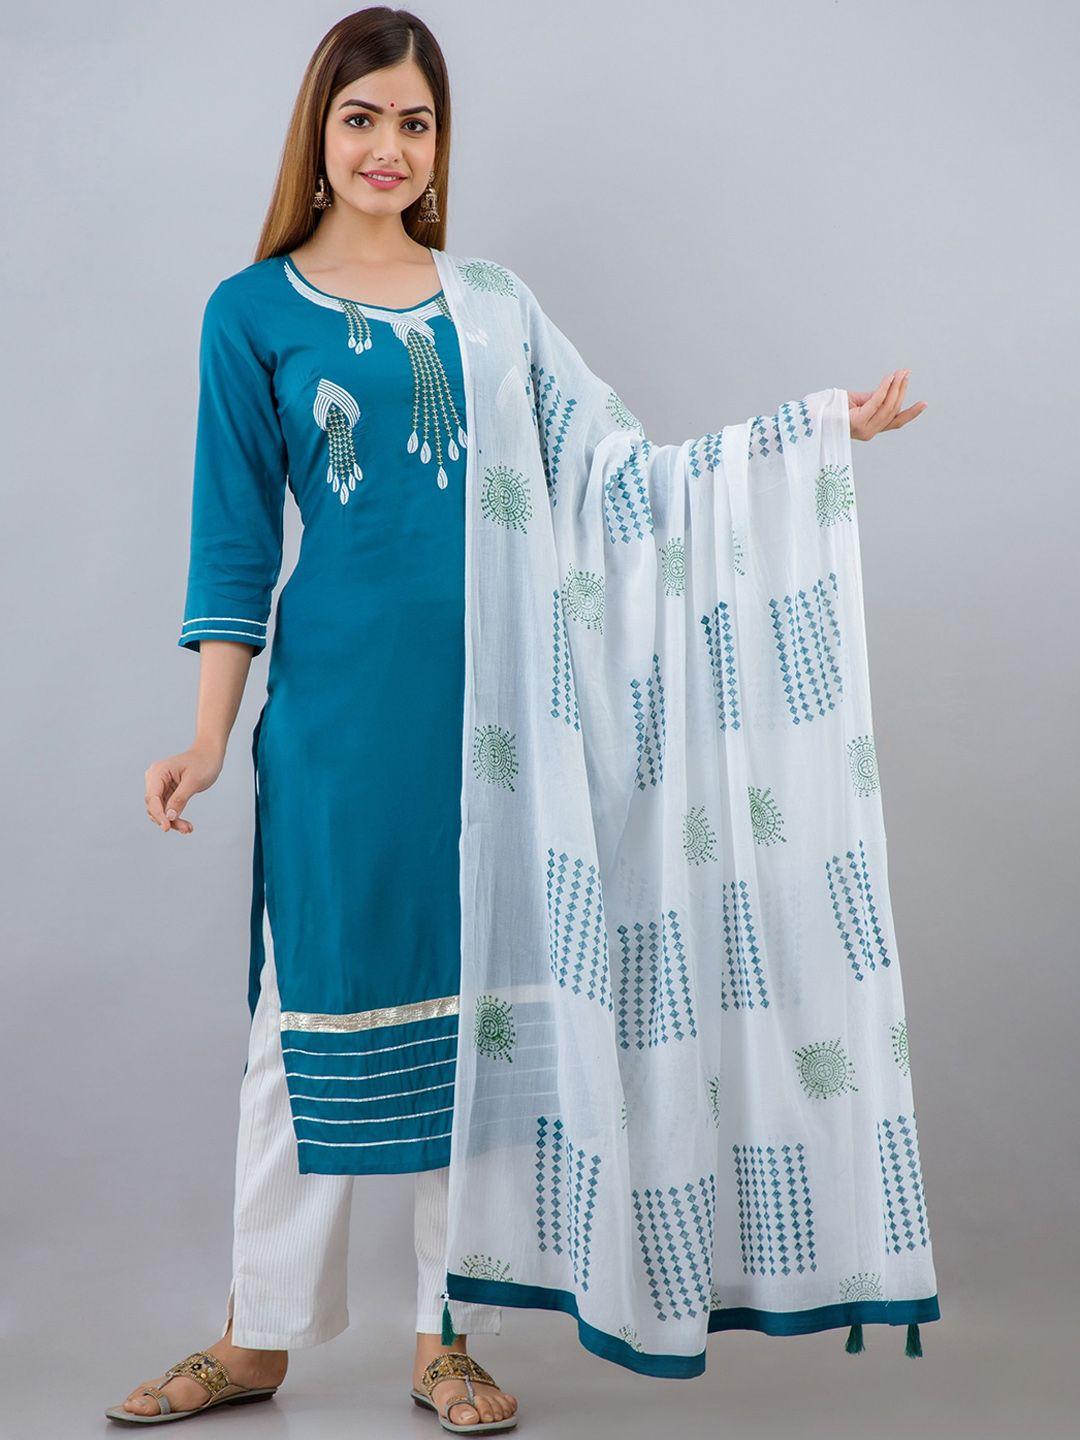 sky shoppie women turquoise blue ethic motif embroidered kurta with trousers and dupatta